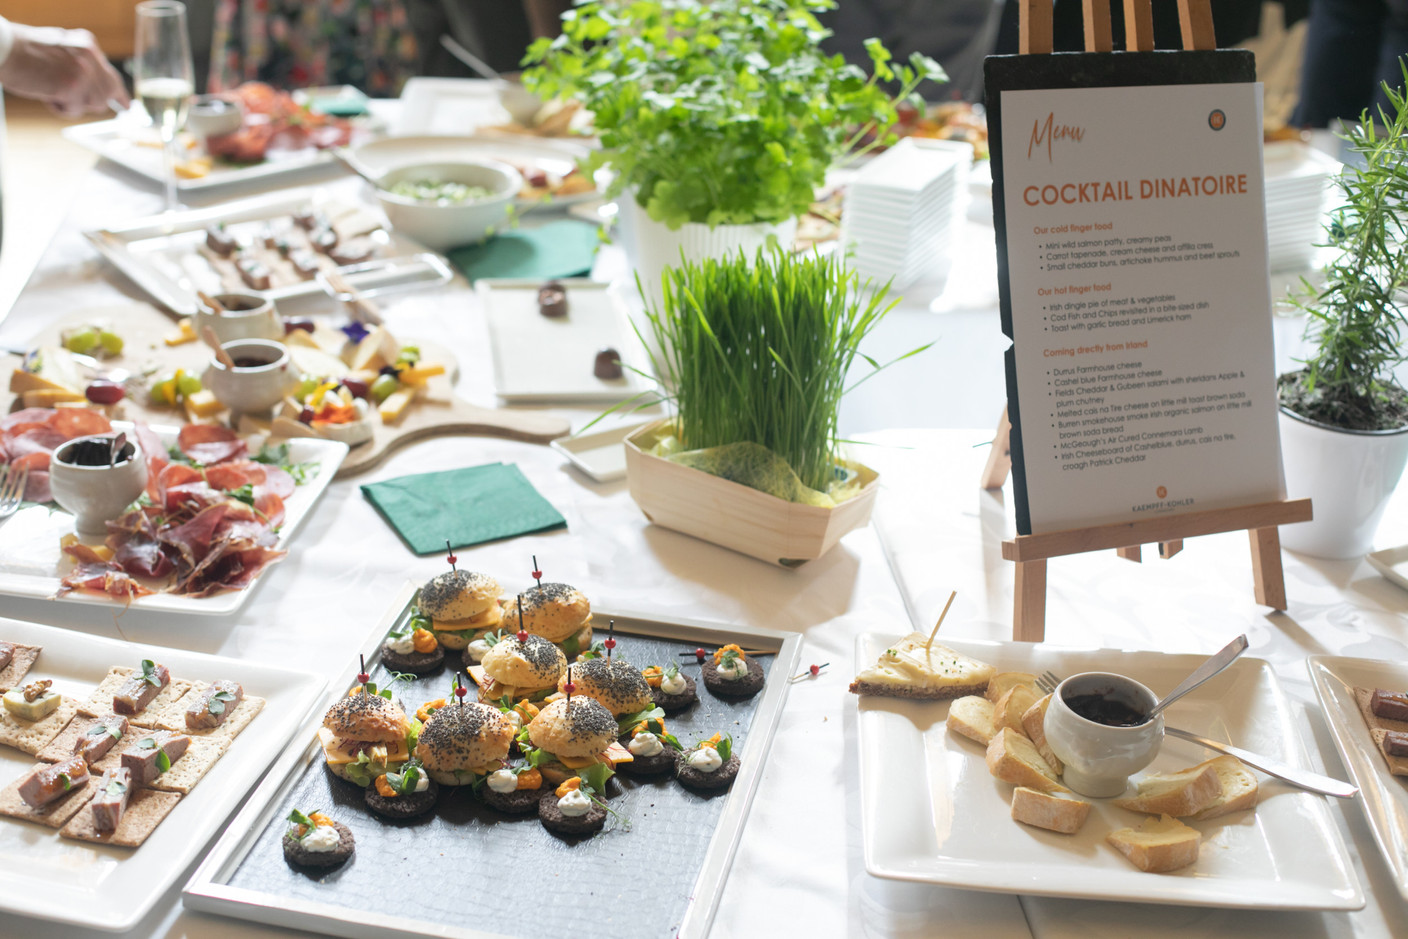 Guests enjoyed Irish specialities, from cheeses to smoked salmon Photo: Matic Zorman / Maison Moderne